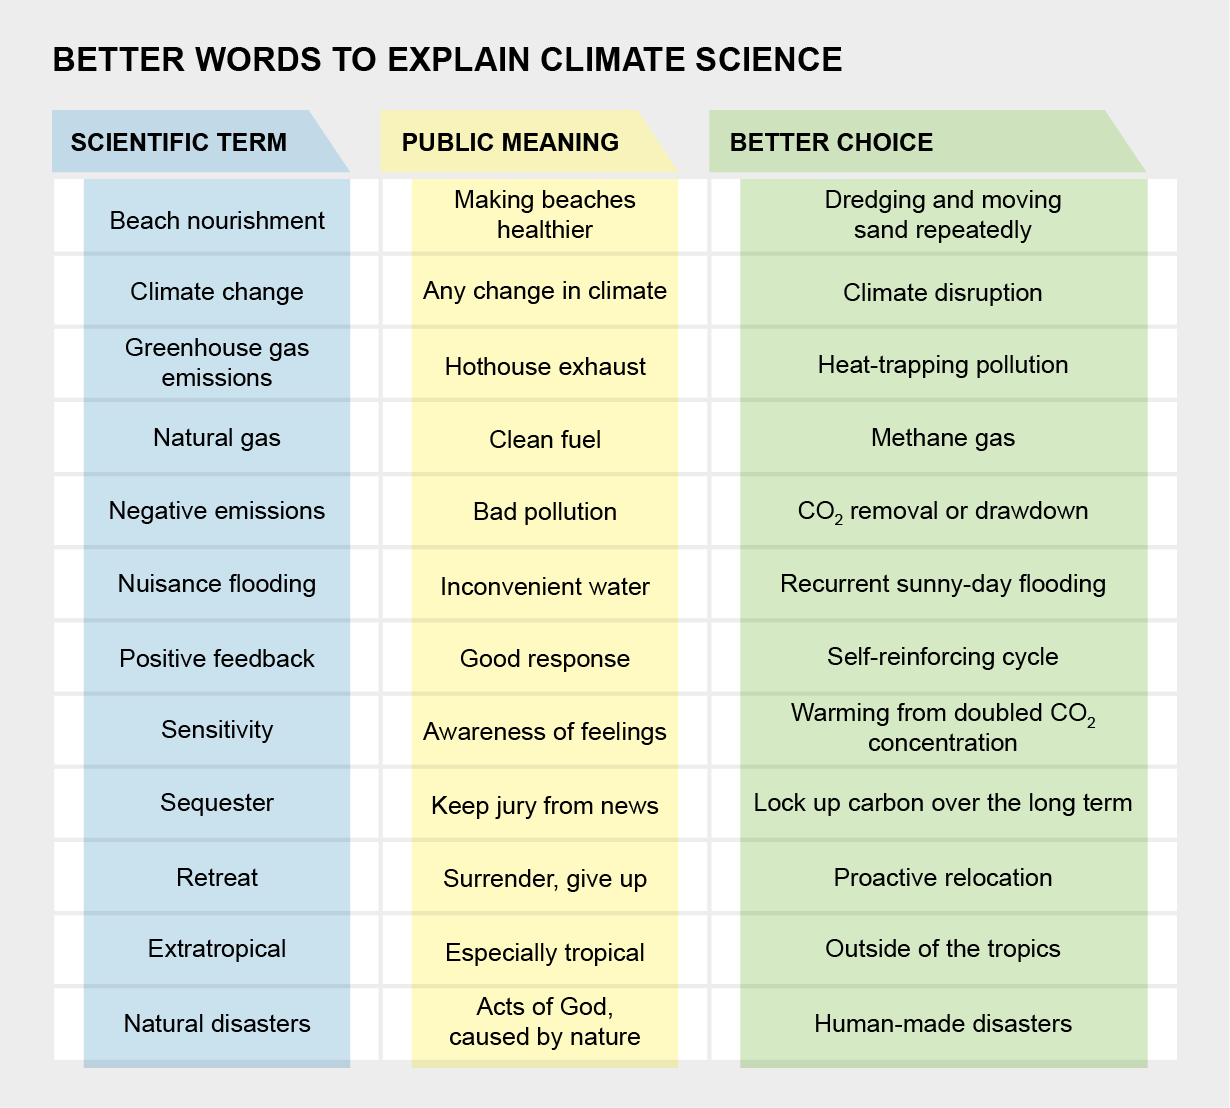 Table of words and definitions highlights various scientific terms used to explain climate science, their colloquial definitions, and better word choices that more accurately capture the intended meanings.